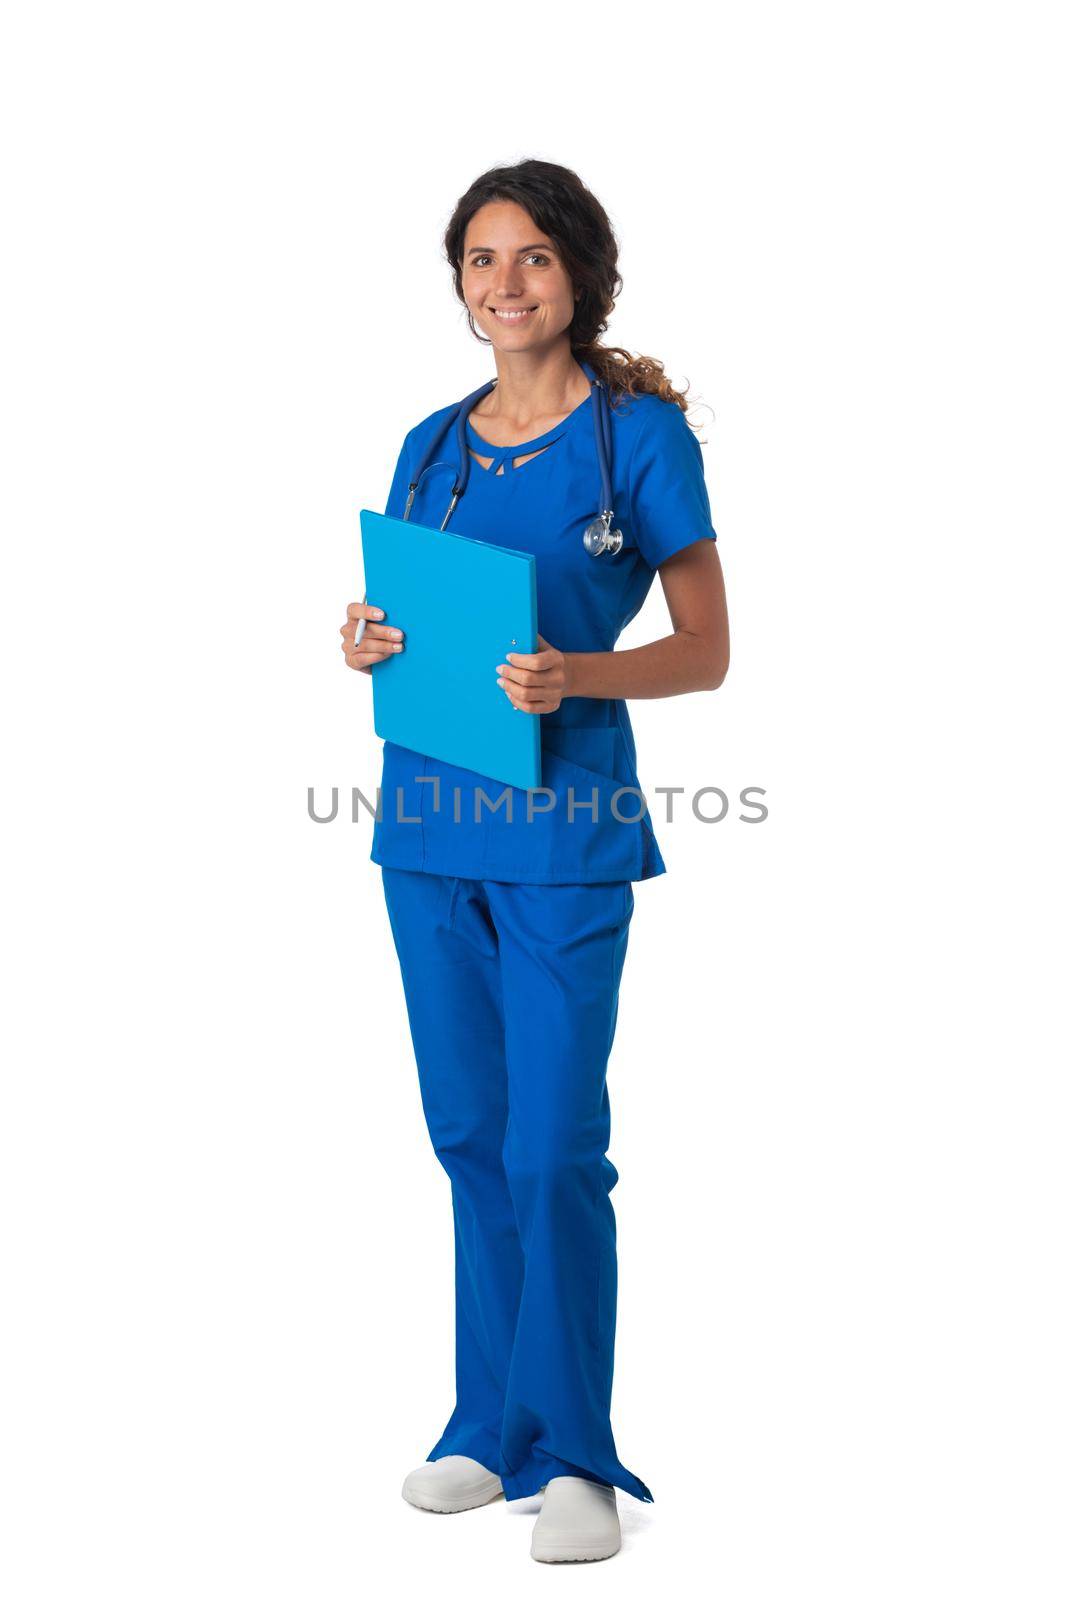 Nurse with folder in hands by ALotOfPeople